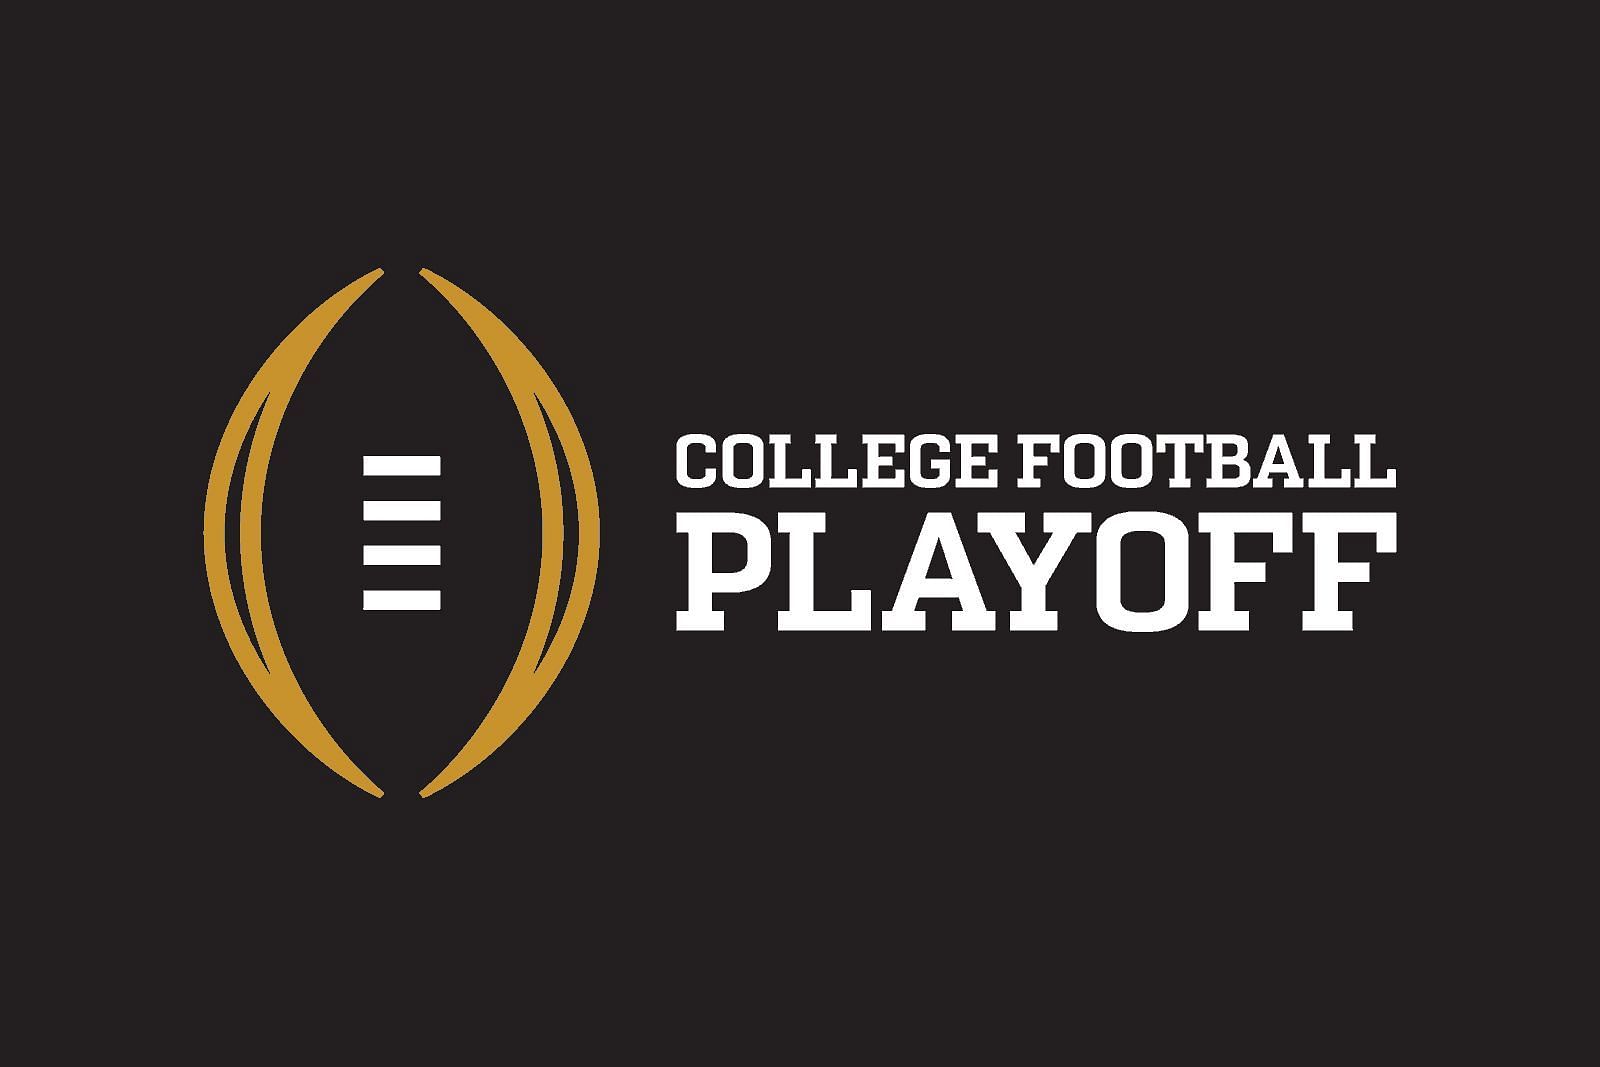 The college football playoff is the premier post-season tournament in college football